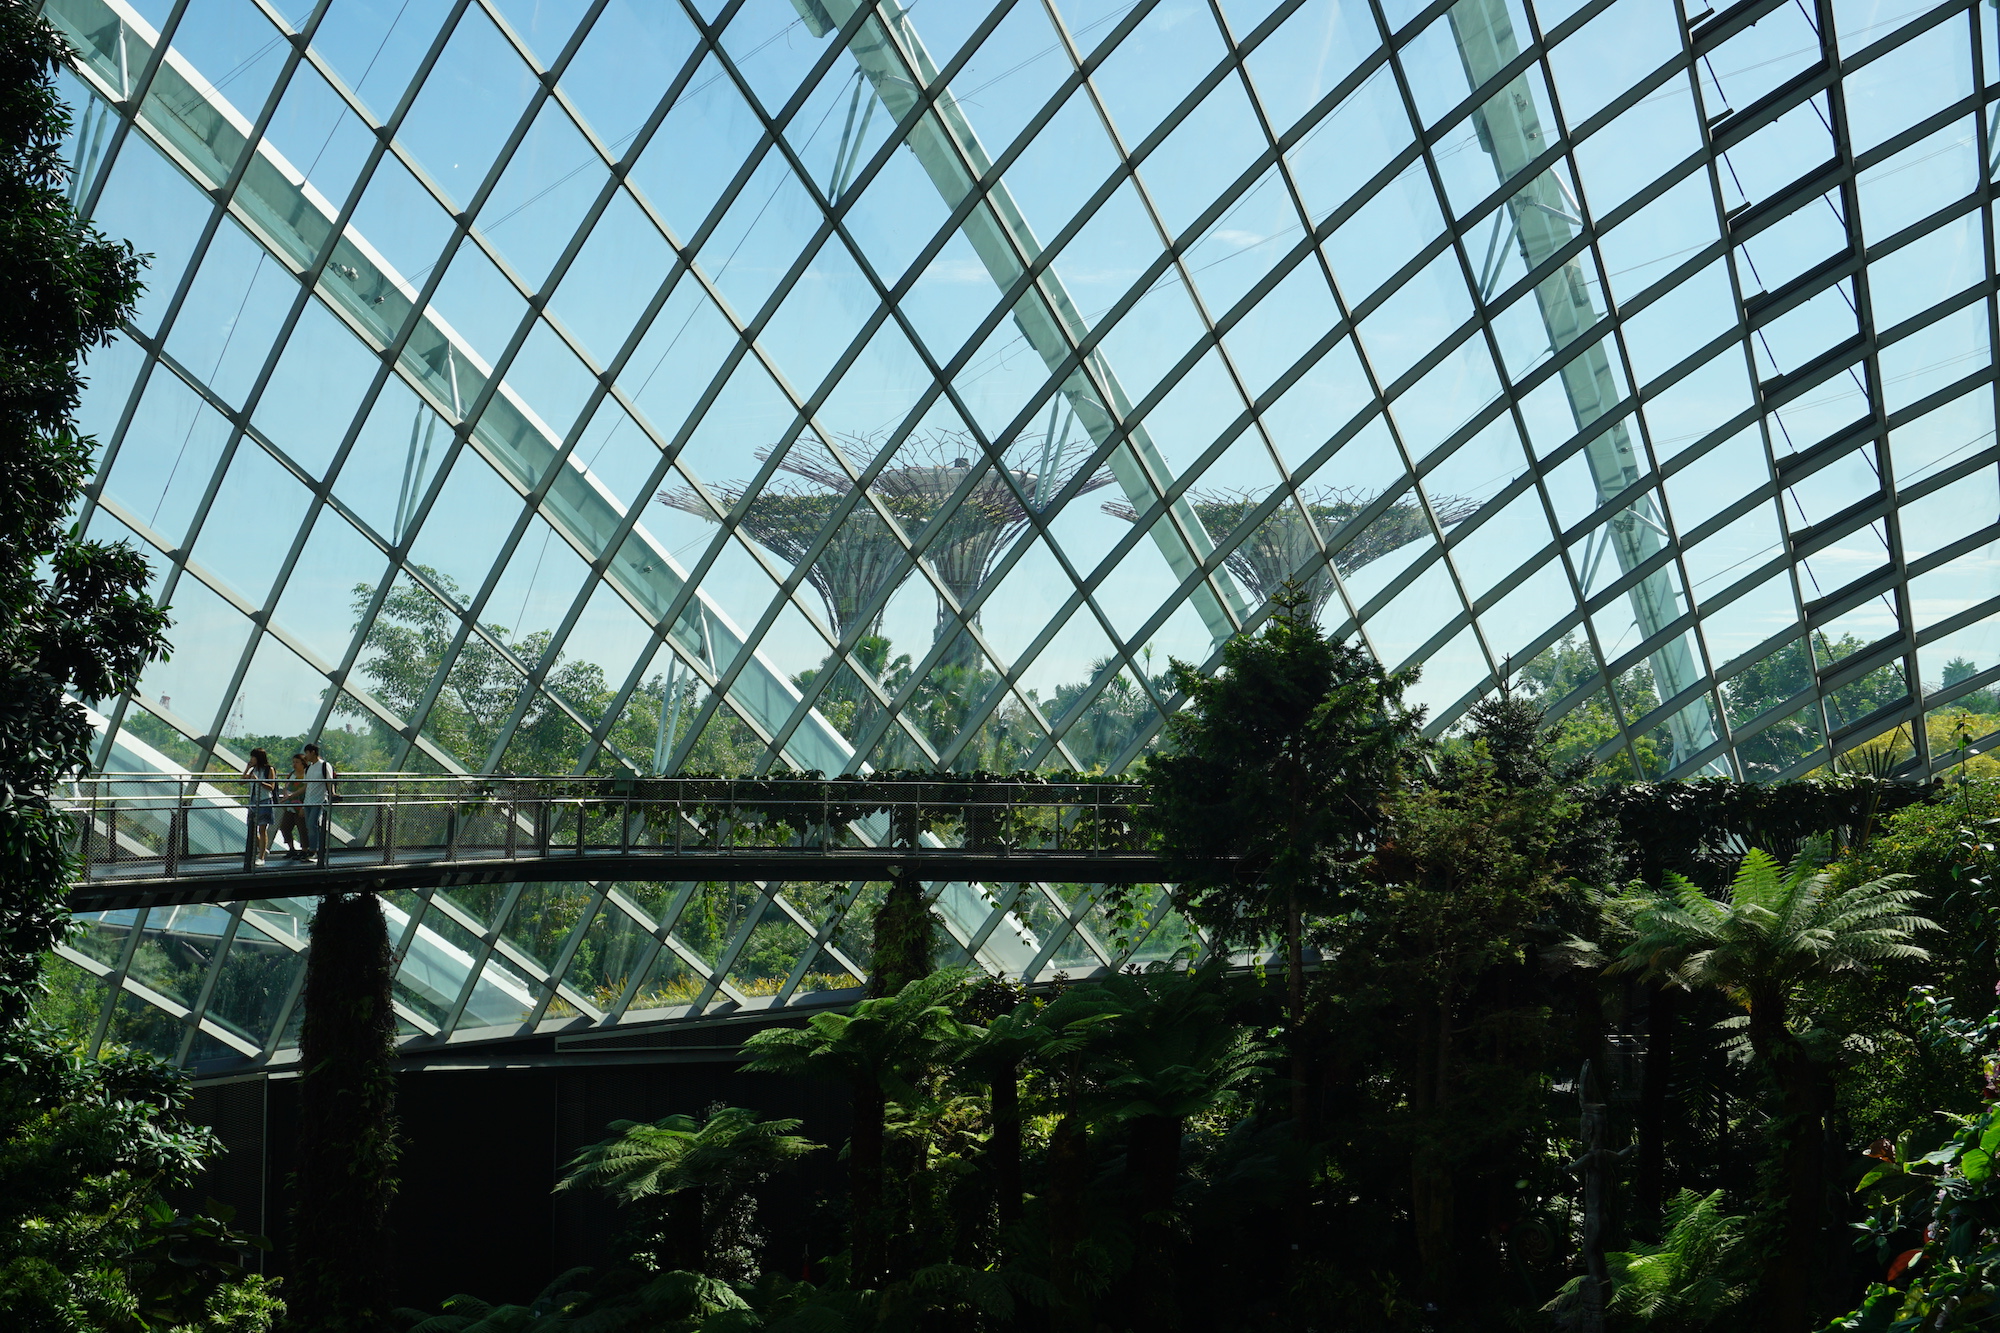 Flower Dome Garden by the bay